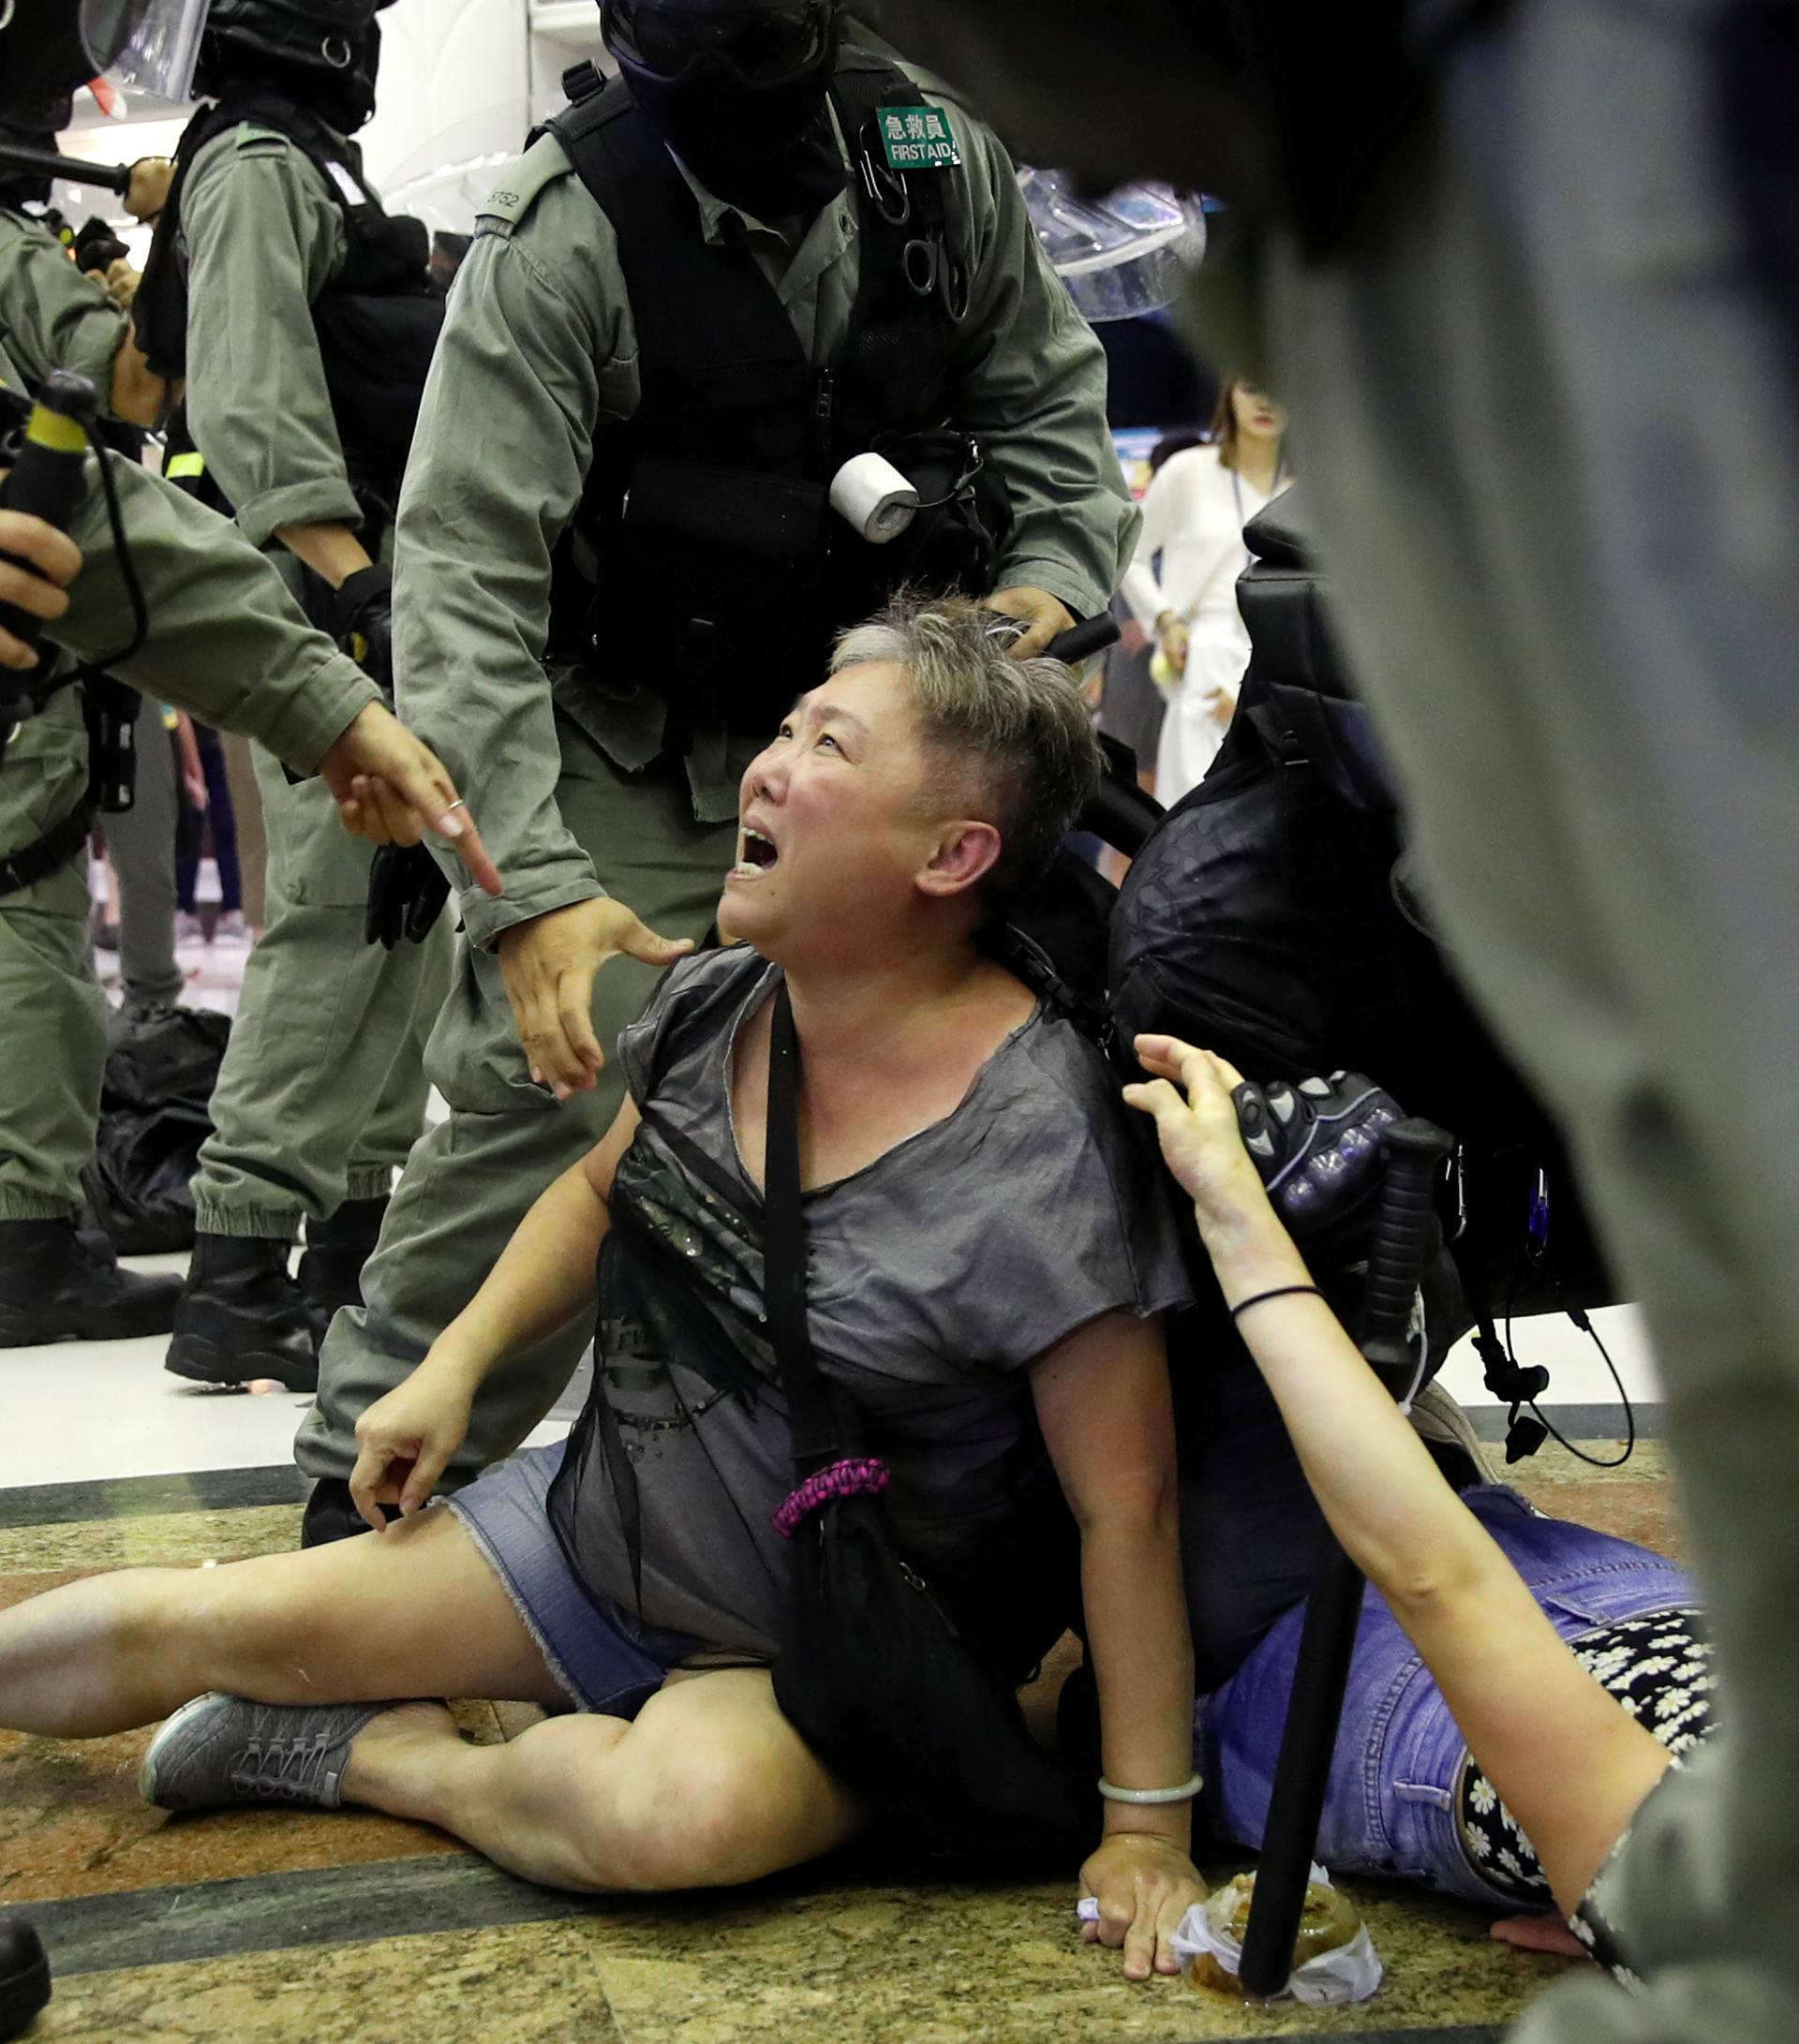 Riot police detain a woman during a protest at a shopping mall in Tai Po, Hong Kong